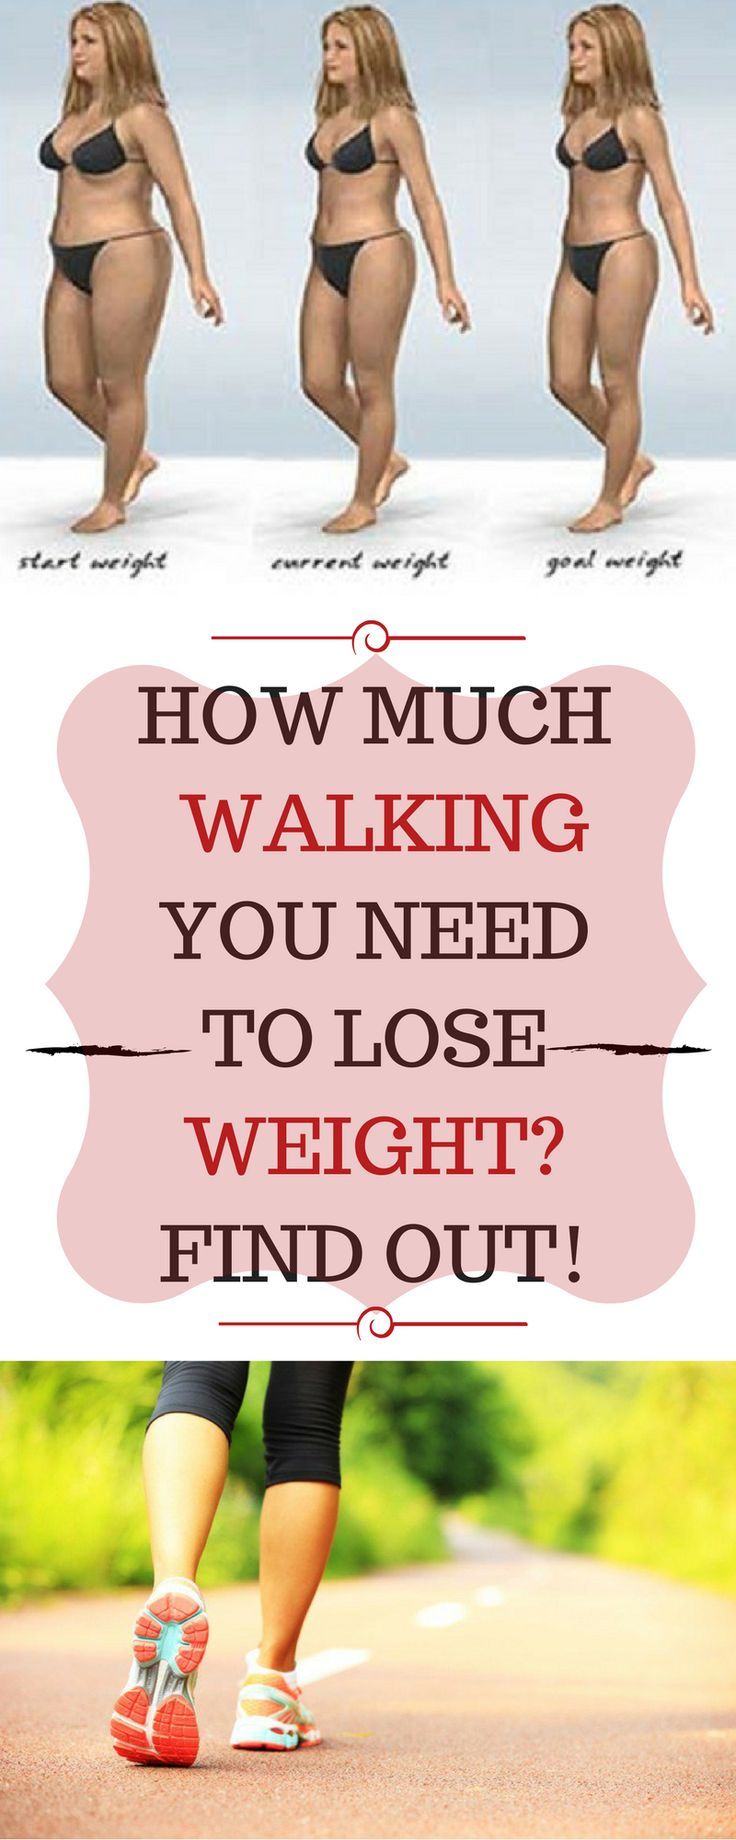 HOW MUCH WALKING YOU NEED TO LOSE WEIGHT FIND OUT